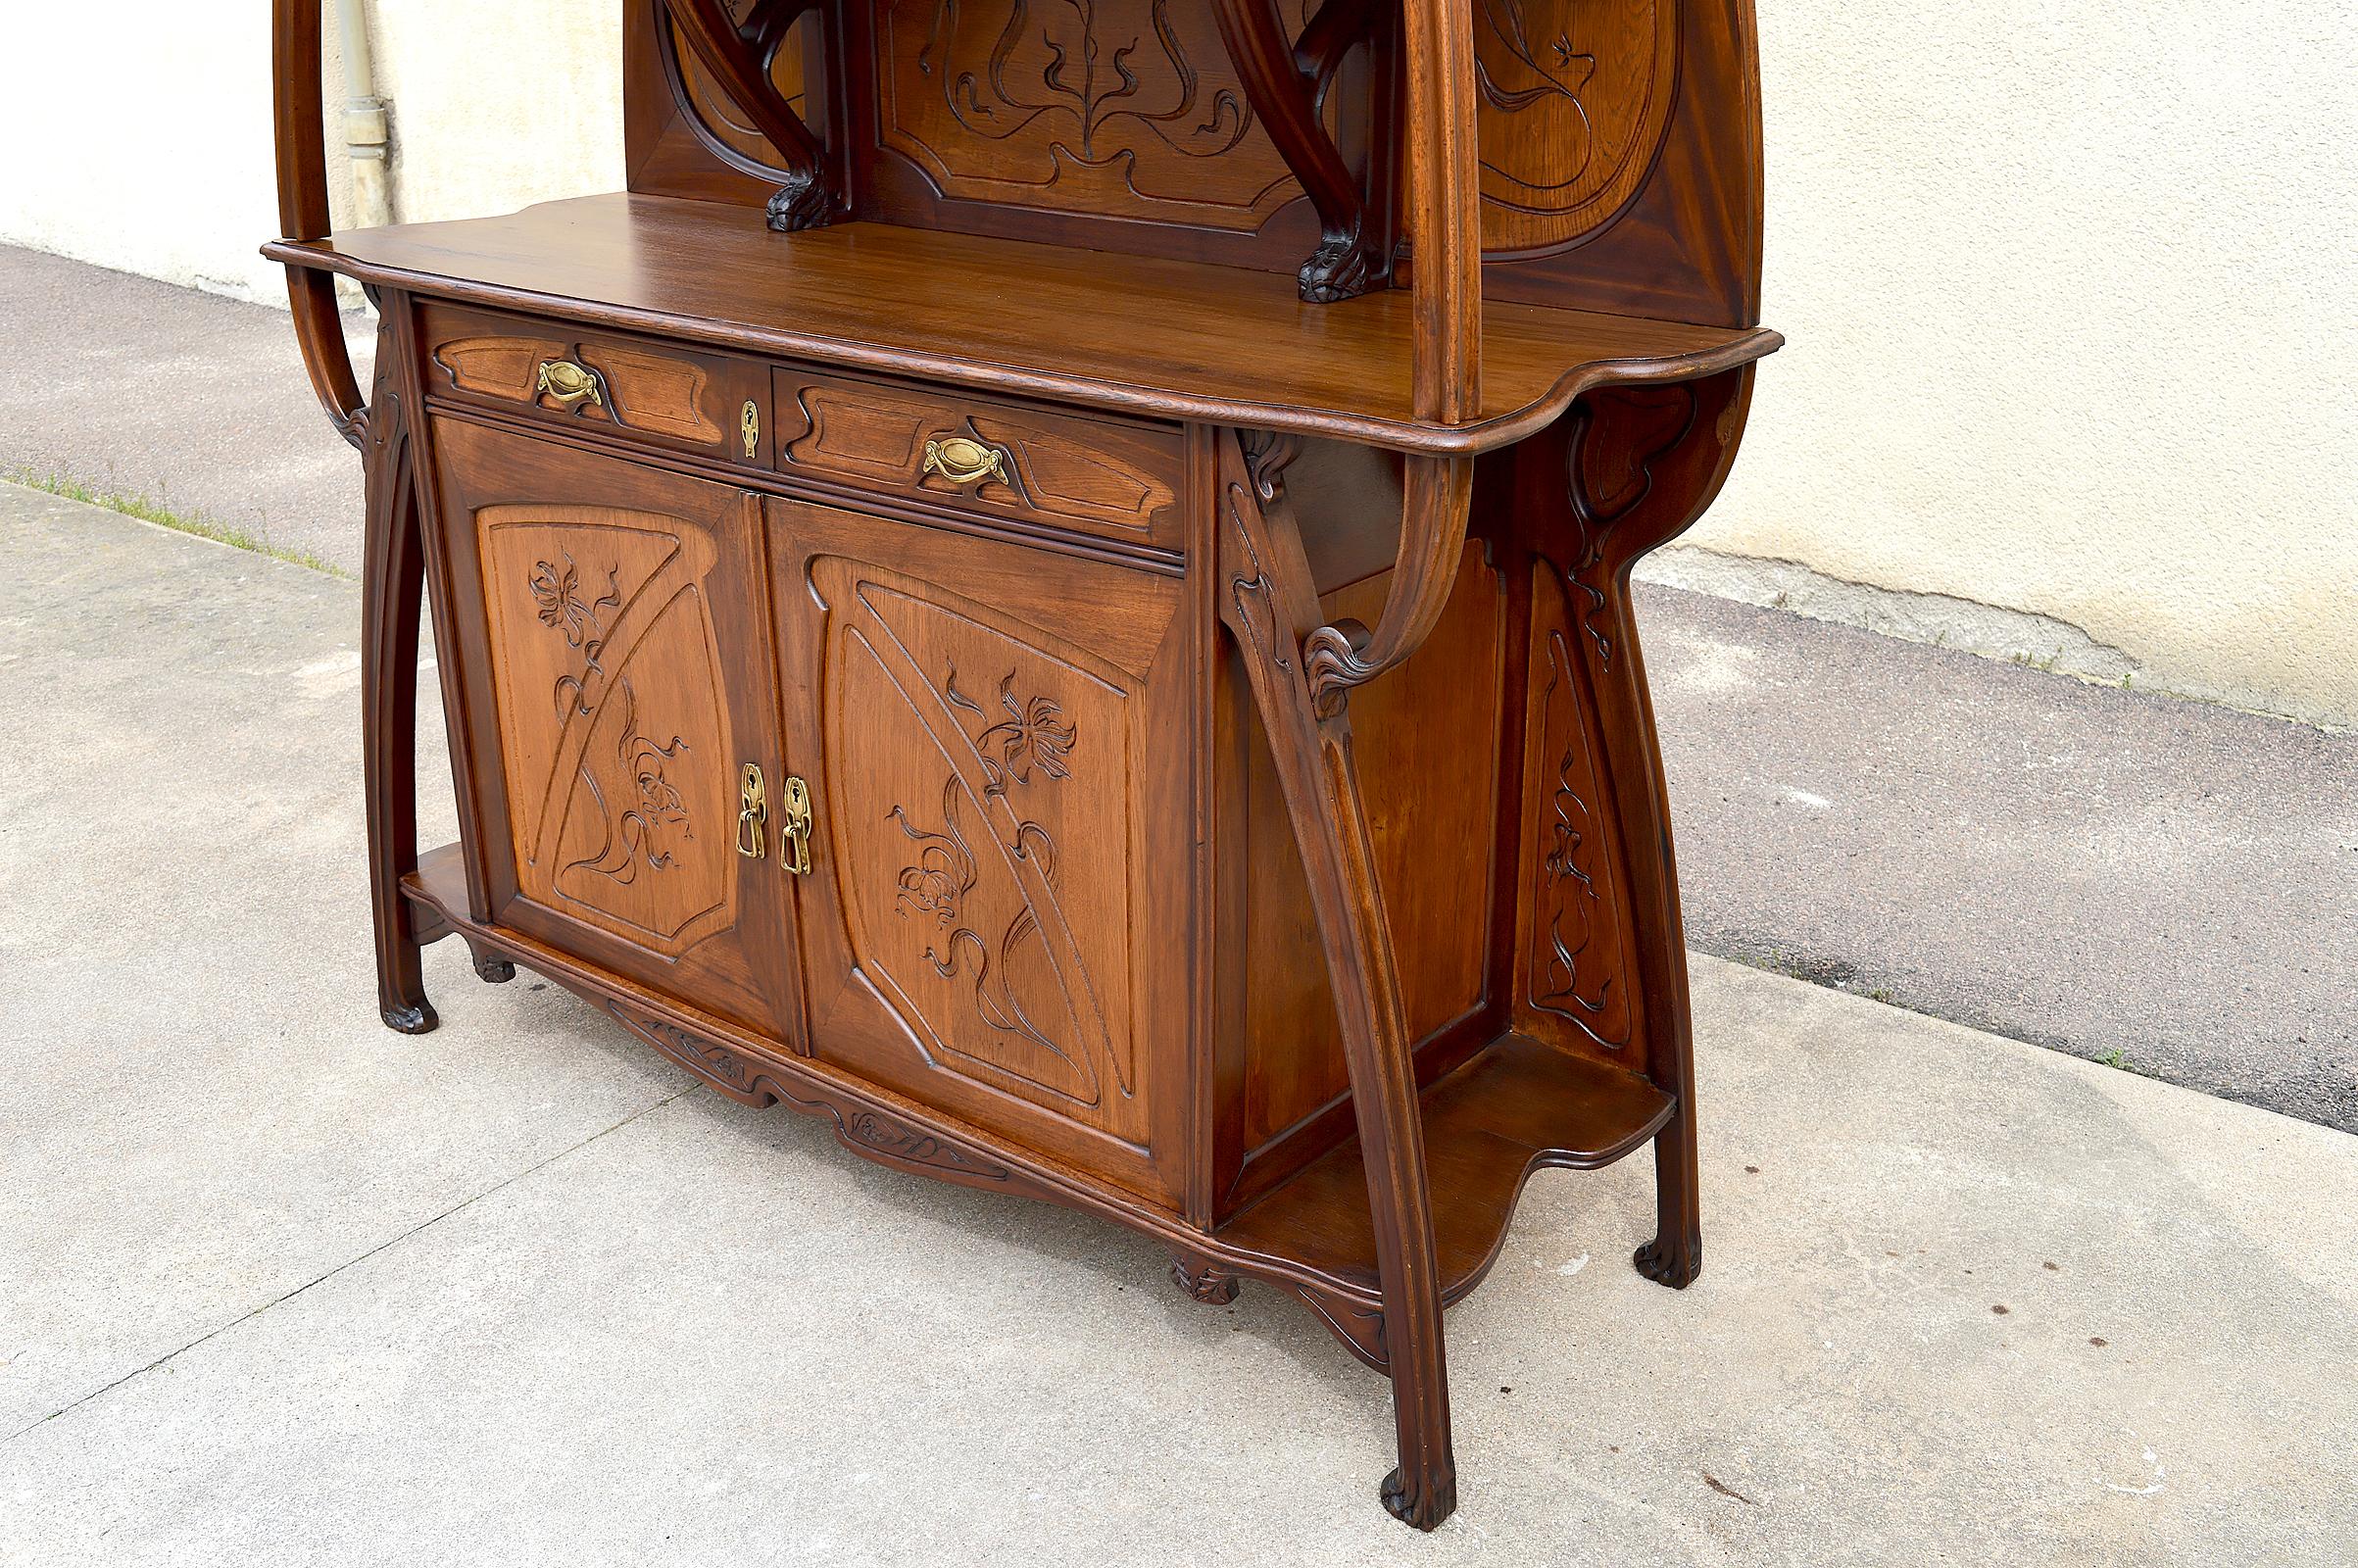 Late 19th Century Art Nouveau Buffet by Louis Brouhot, France, circa 1890